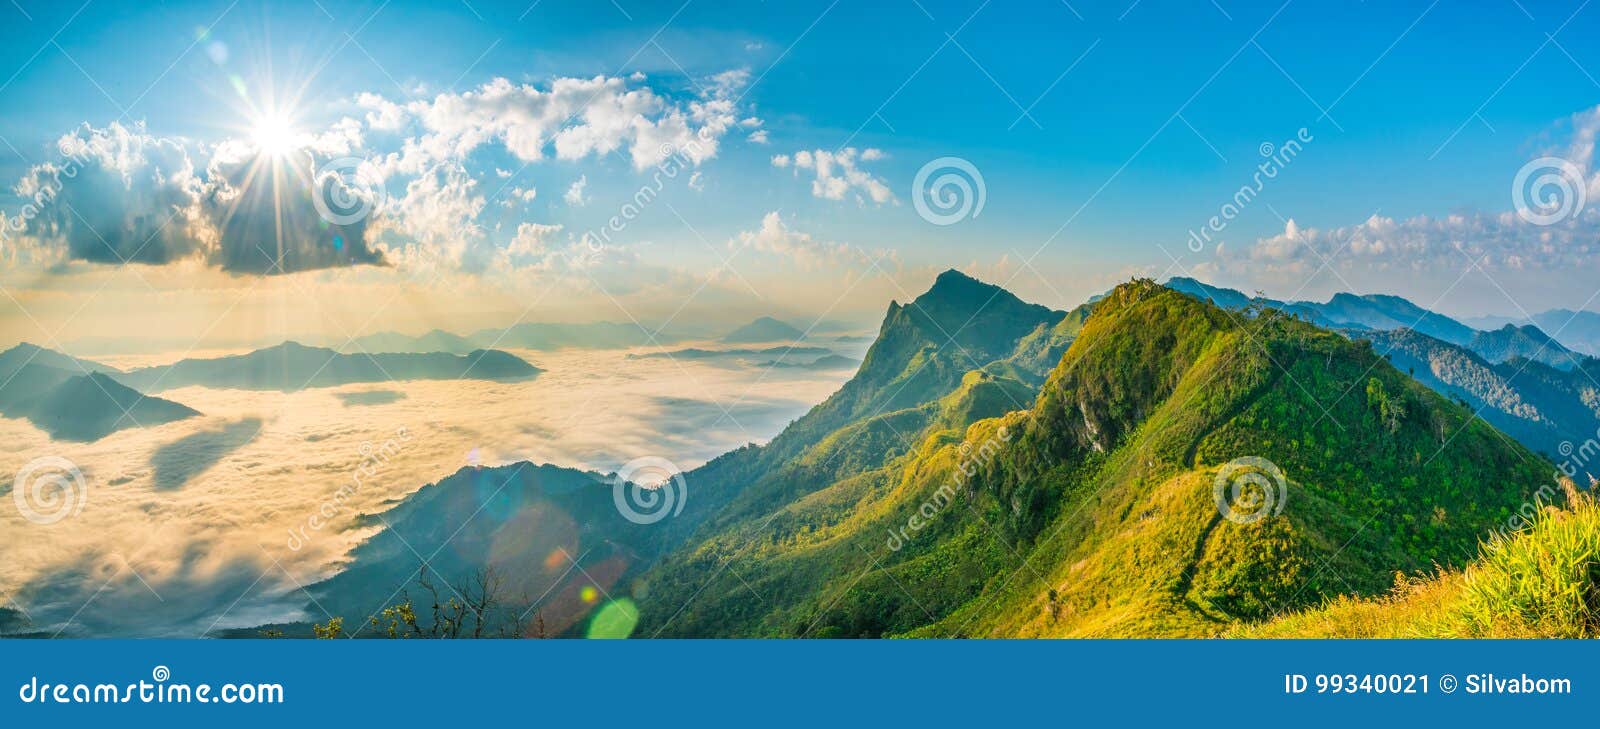 mountain landscape nature summer or spring background with sun r